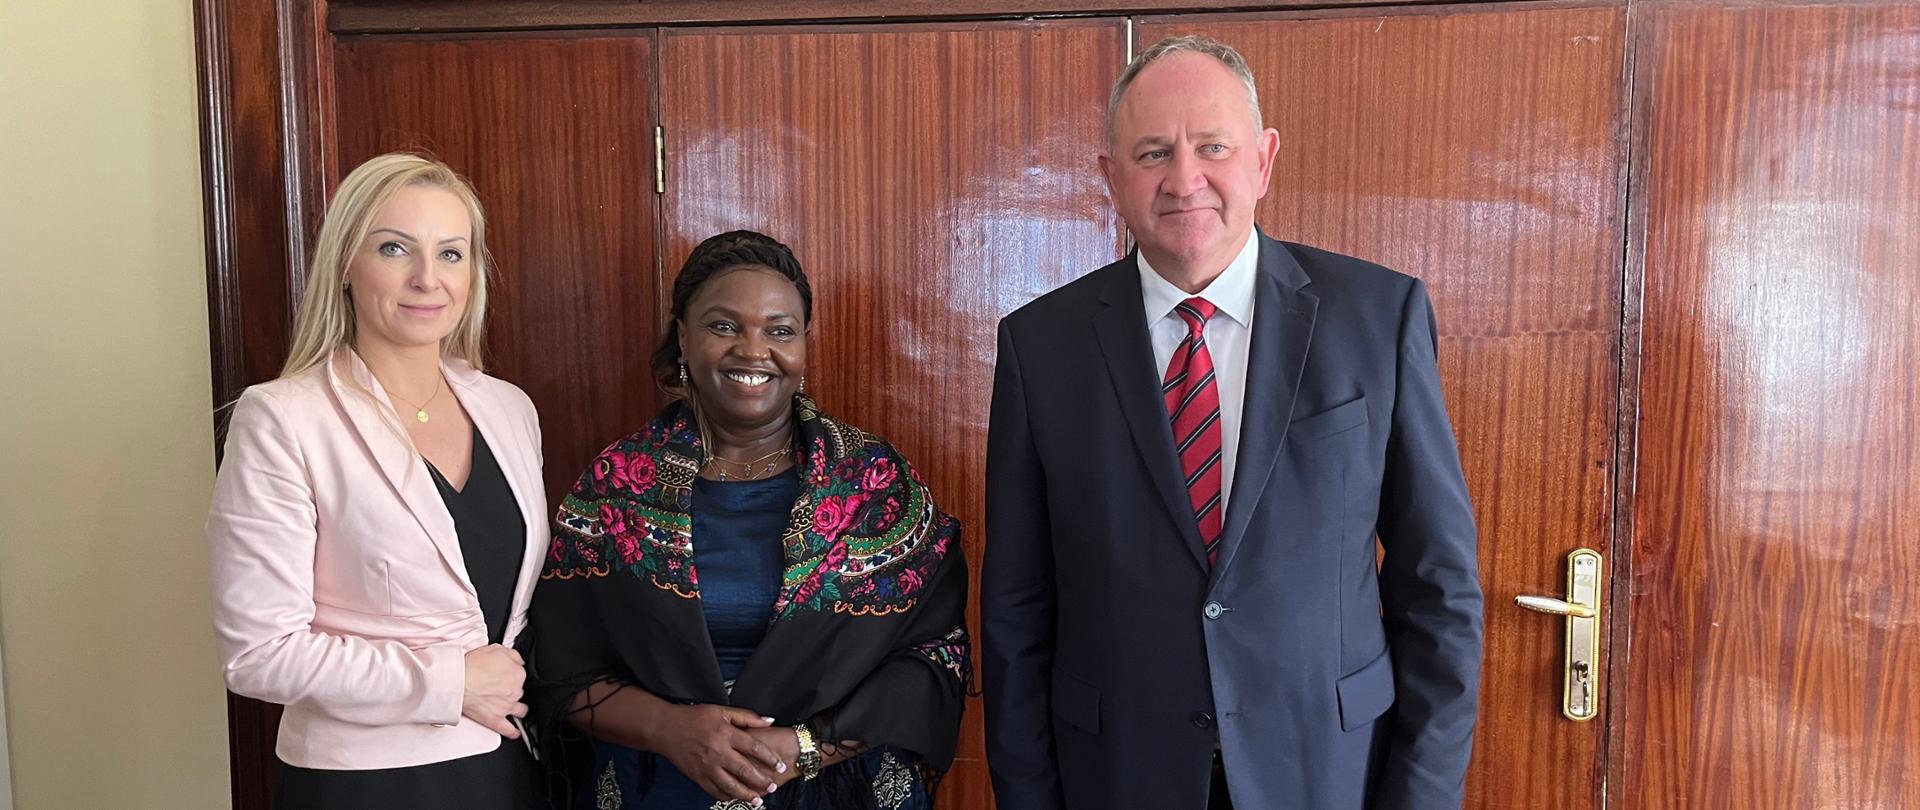 The Second Lady of the Republic of Kenya on an official visit to the Embassy of the Republic of Poland in Nairobi.